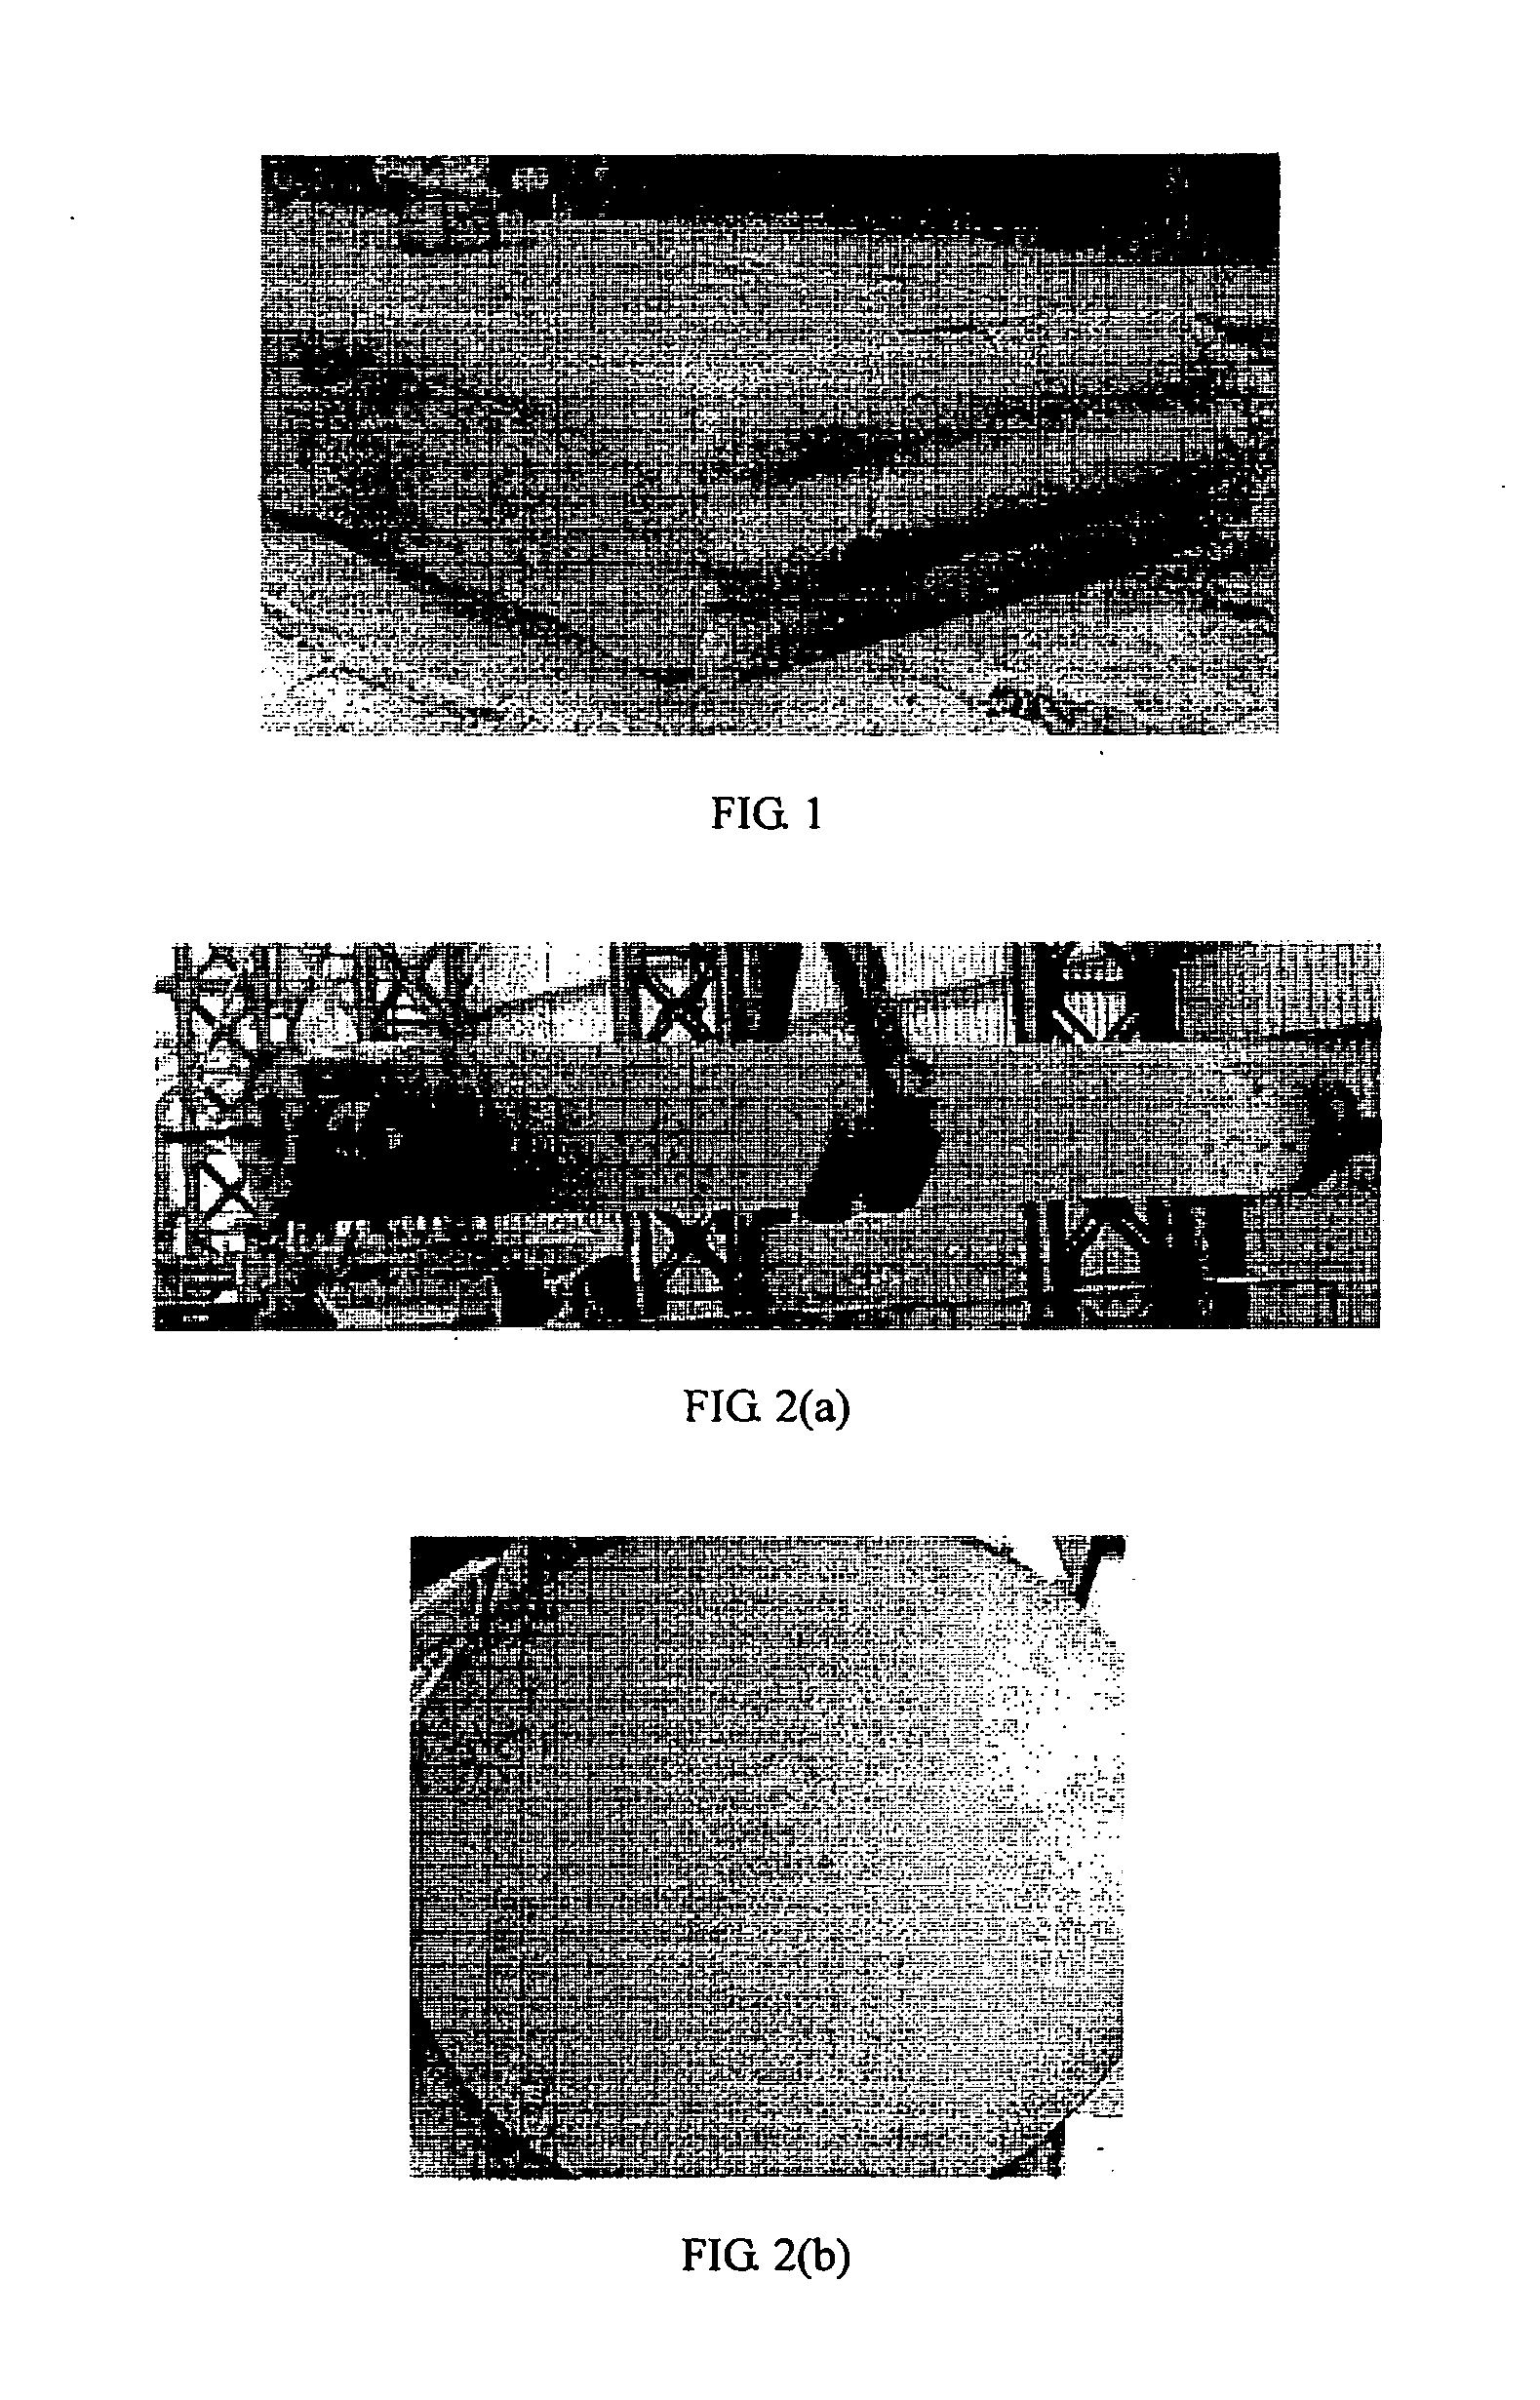 Method for enhancing the self-feeding ability of a heavy section casting blank